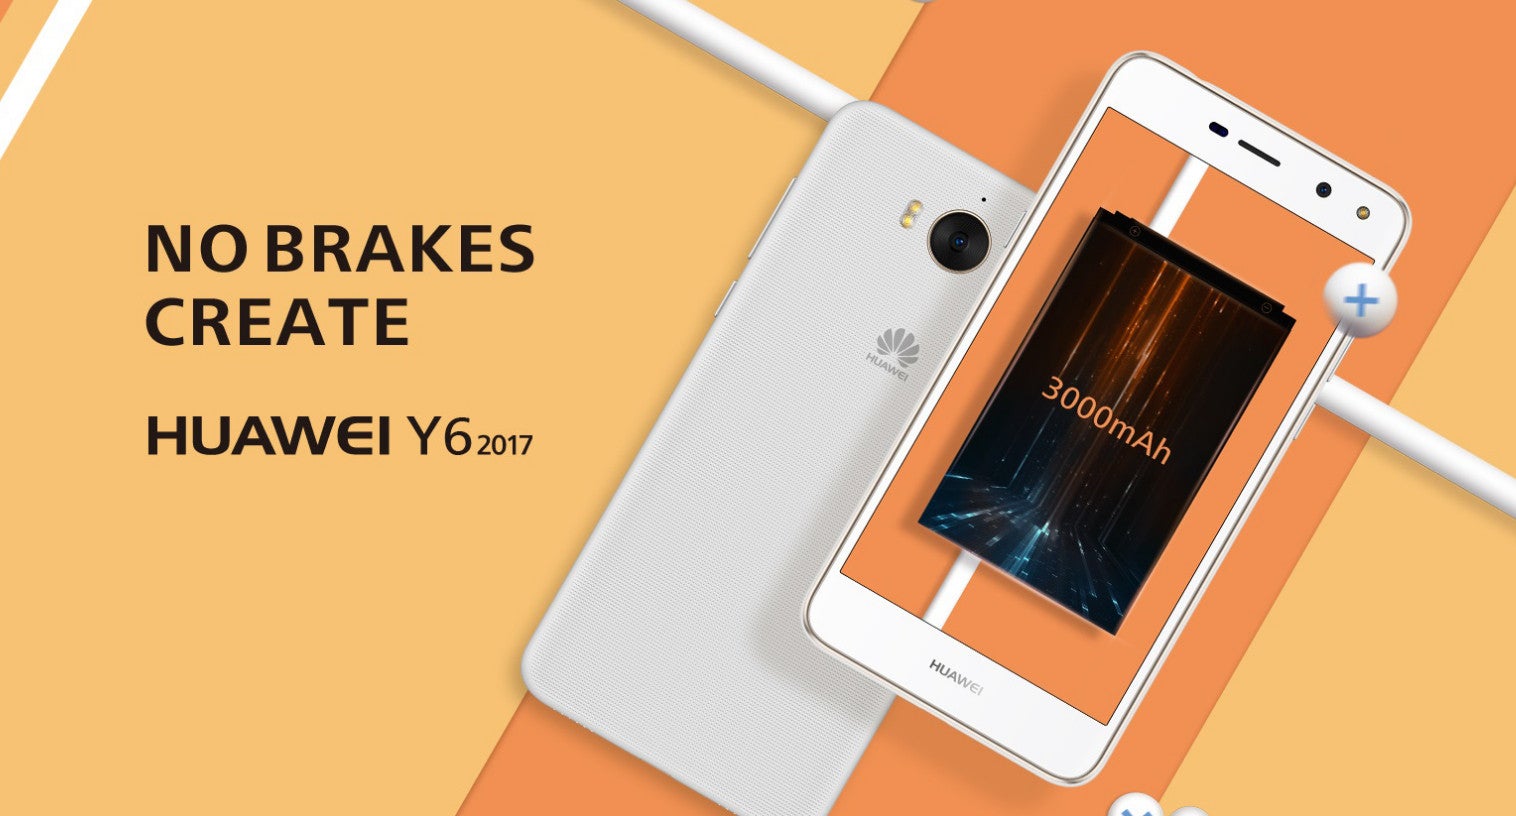 Affordable Huawei Y6 2017 goes official, still uses Android 6.0 Marshmallow